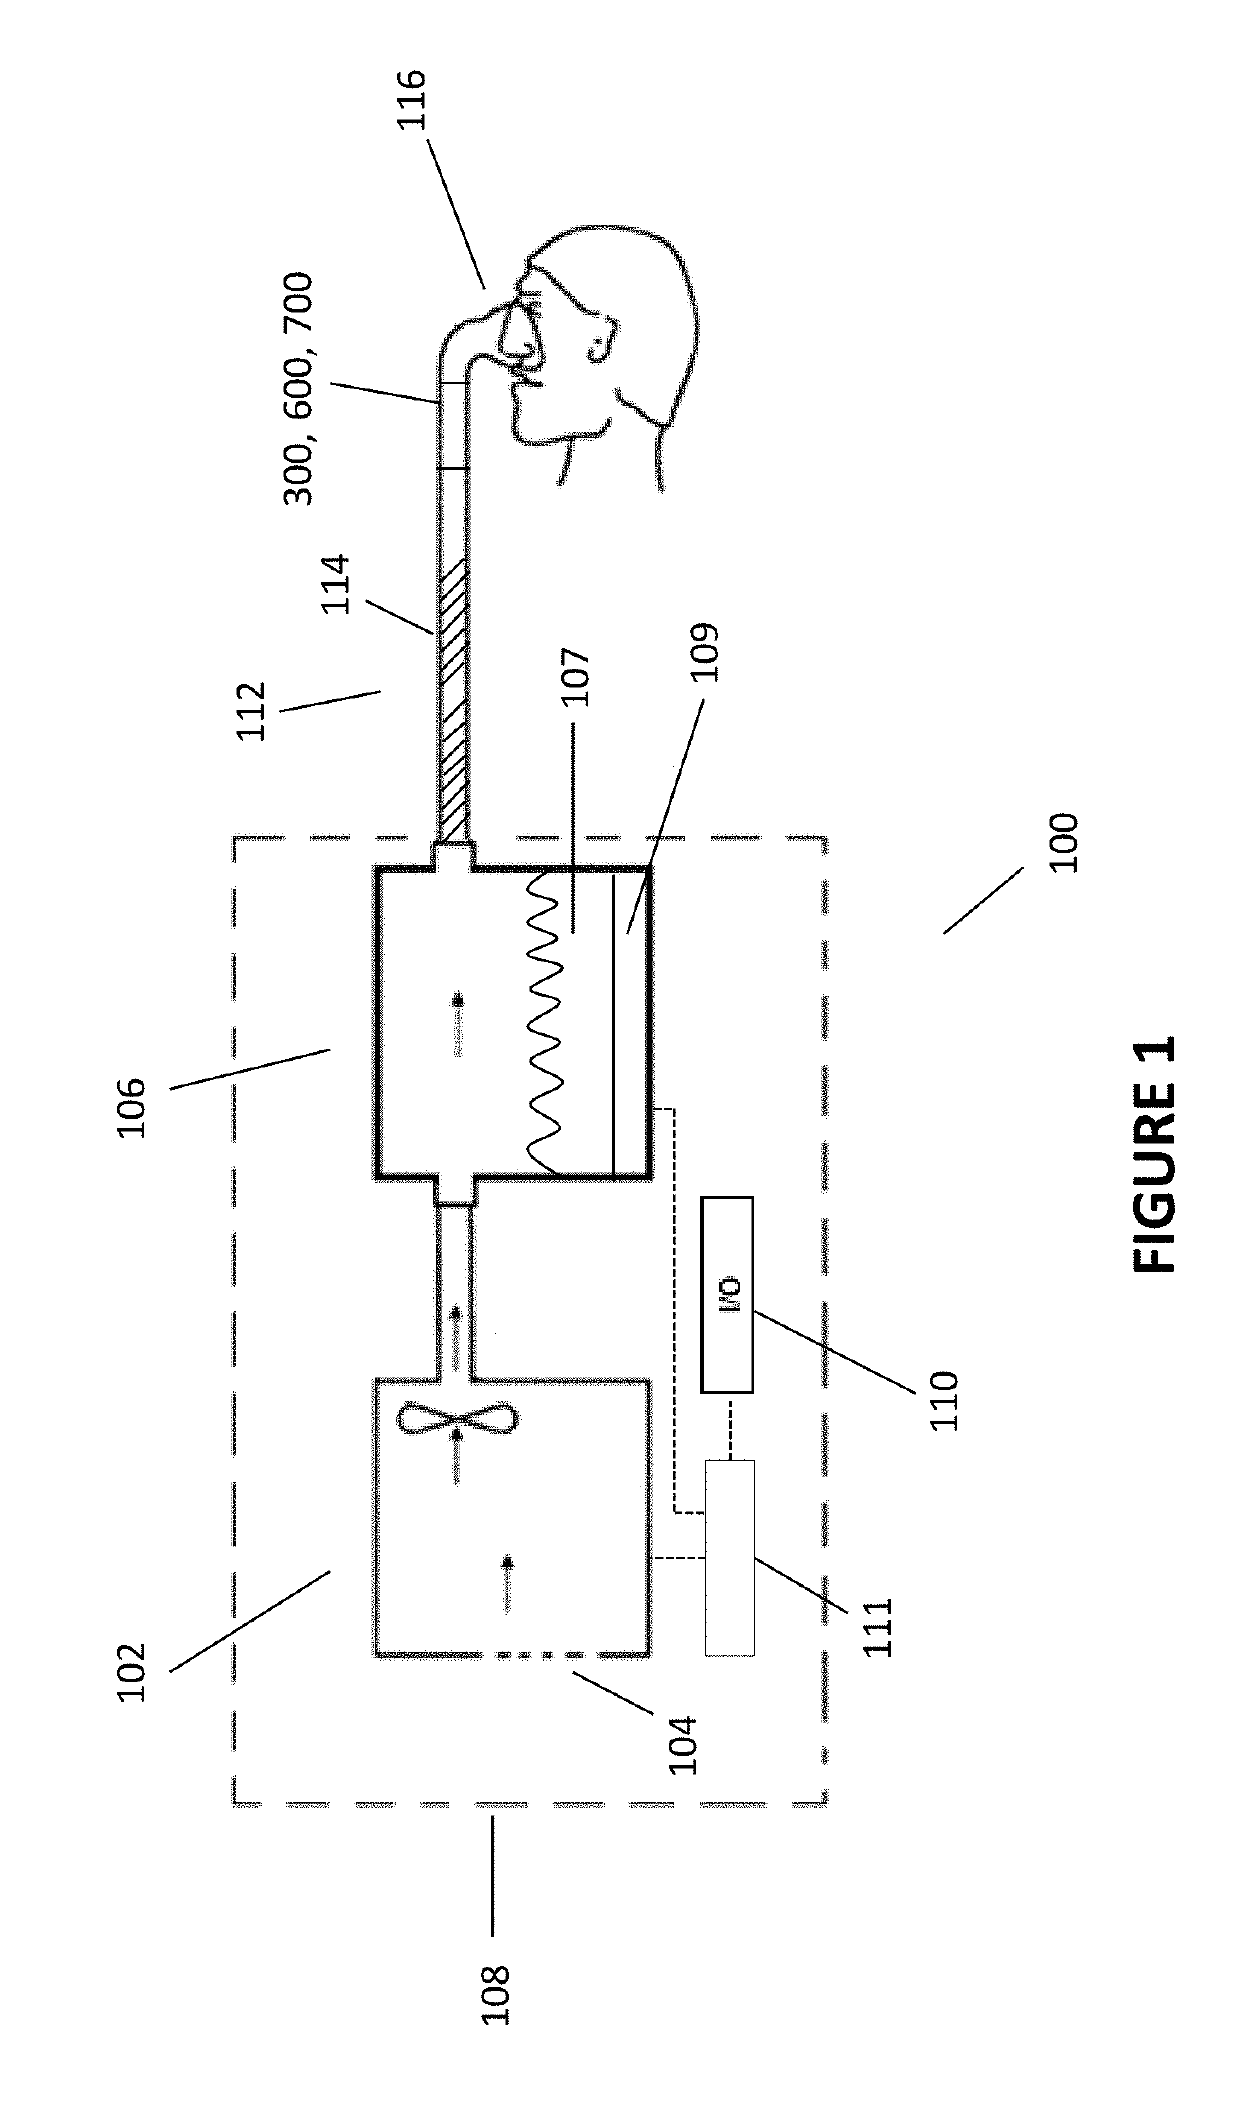 Sensing and control arrangements for respiratory device